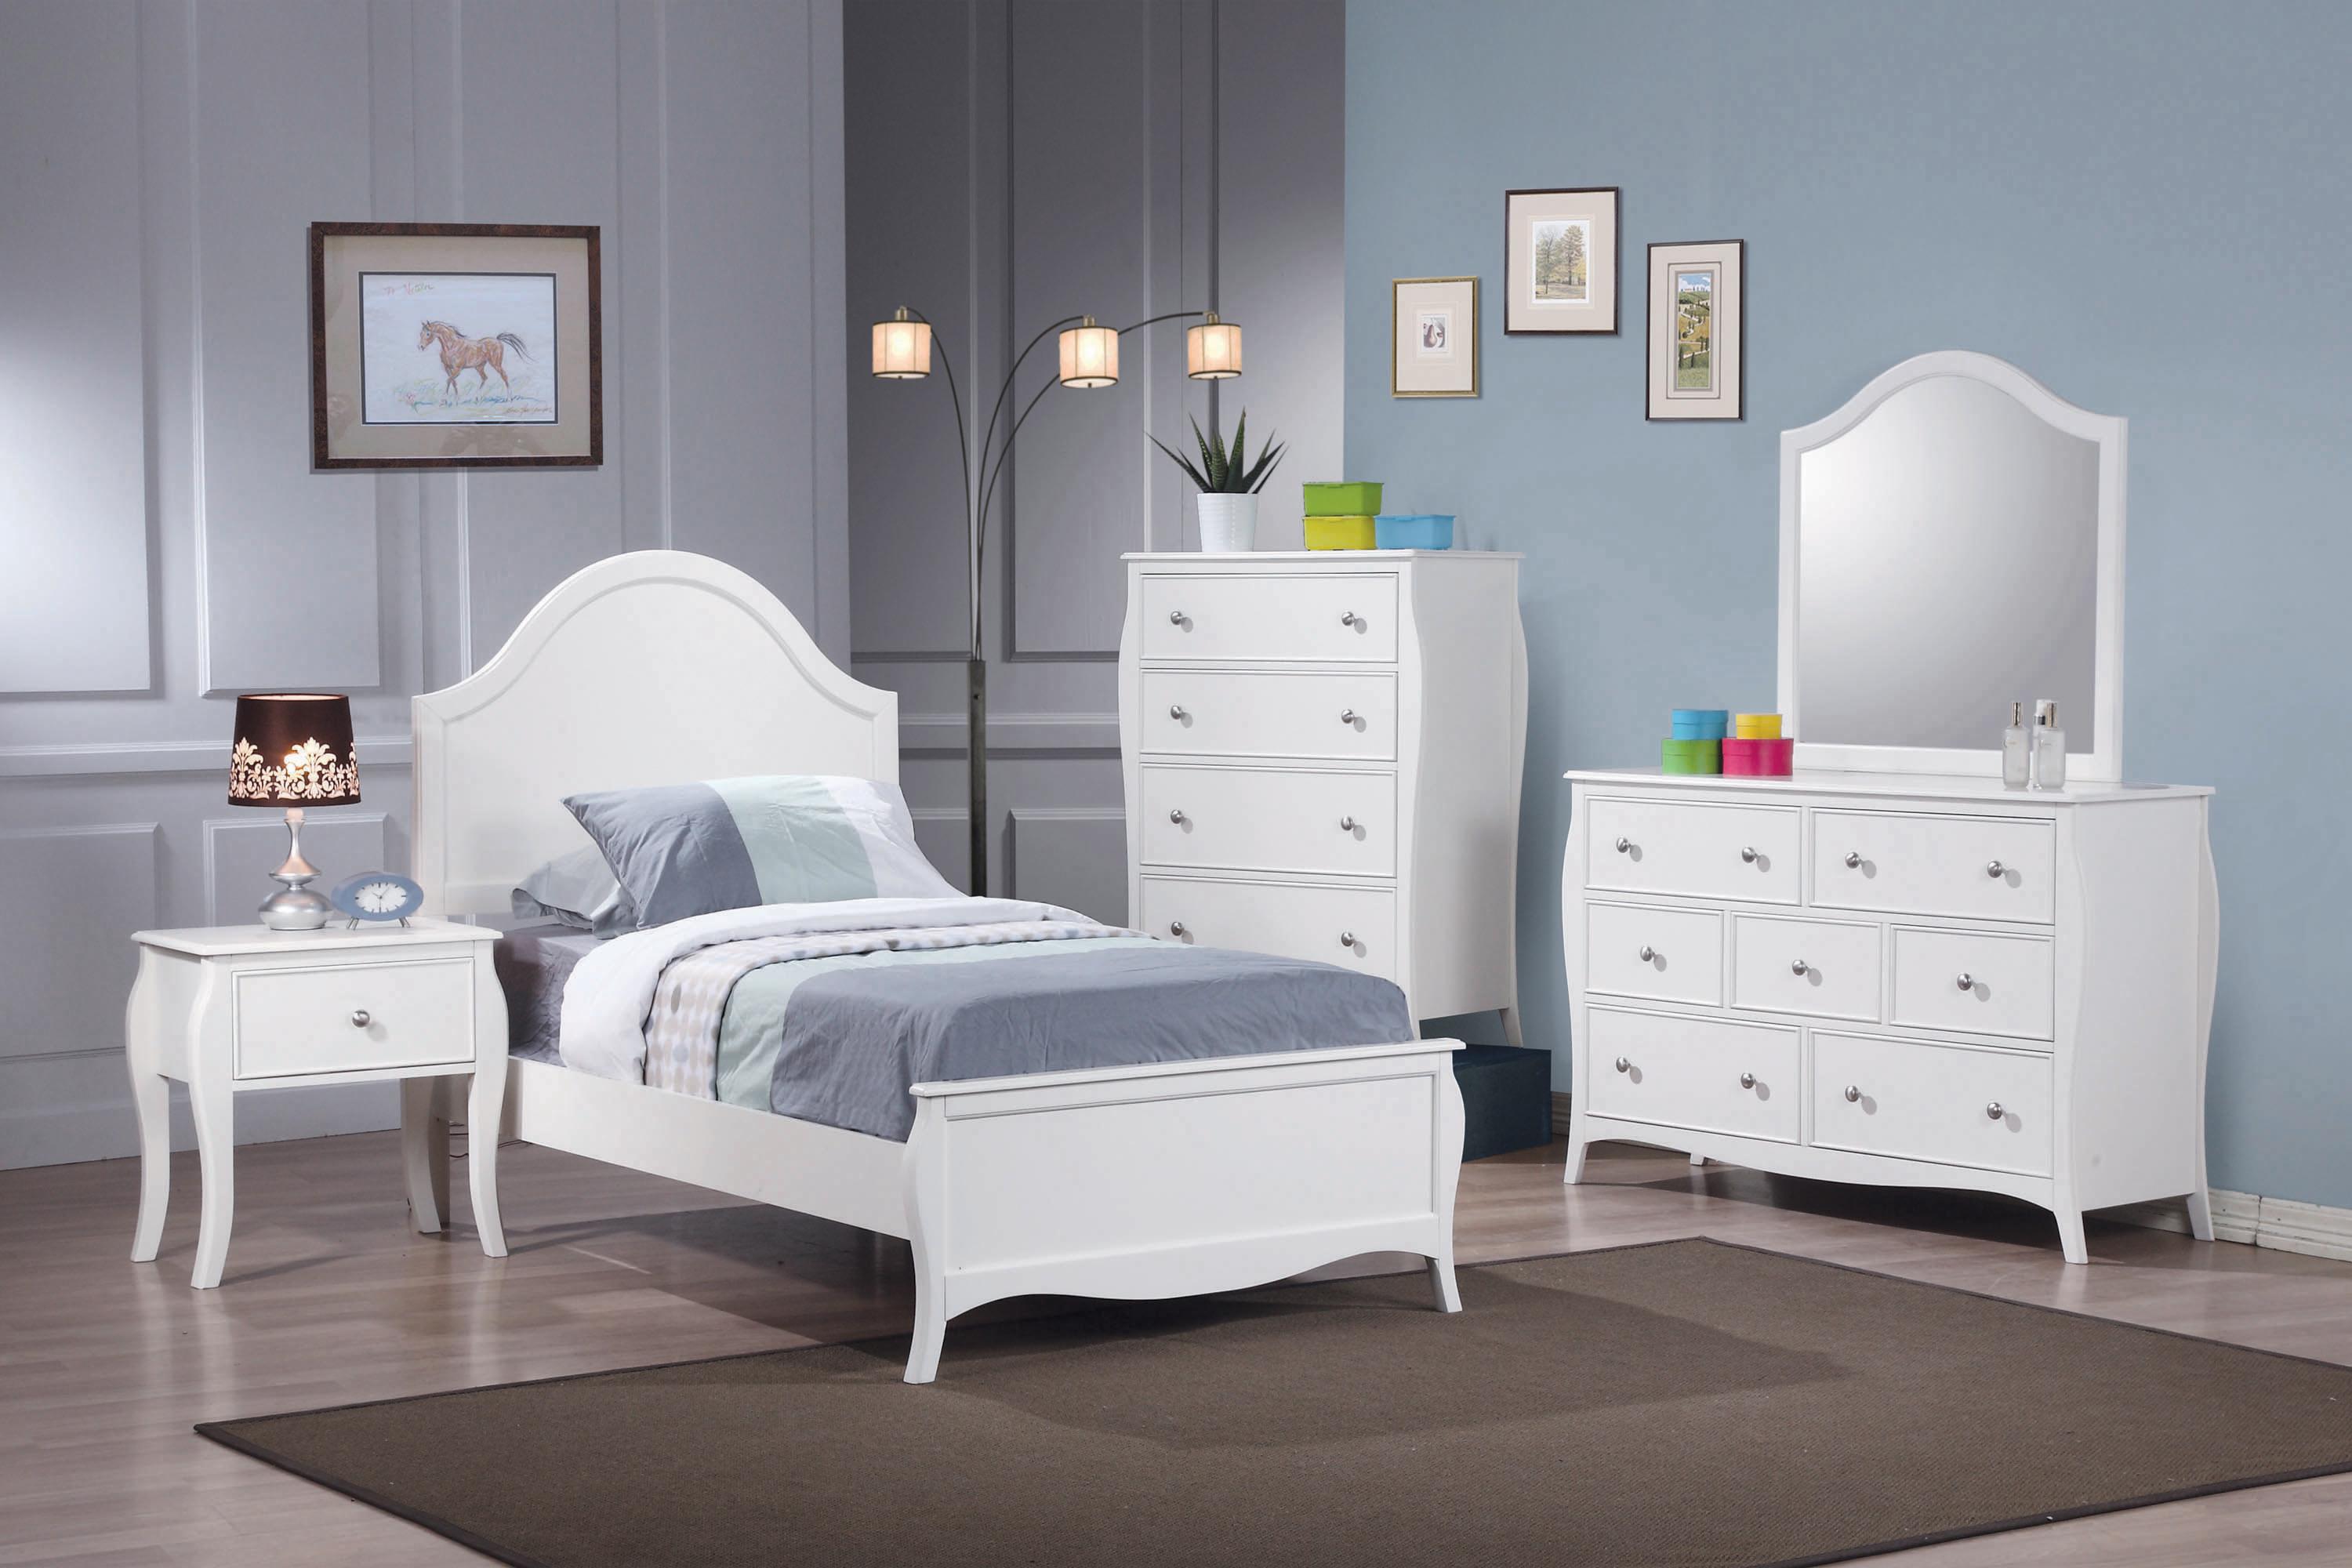 Traditional Bedroom Set 400561F-5PC Dominique 400561F-5PC in White 